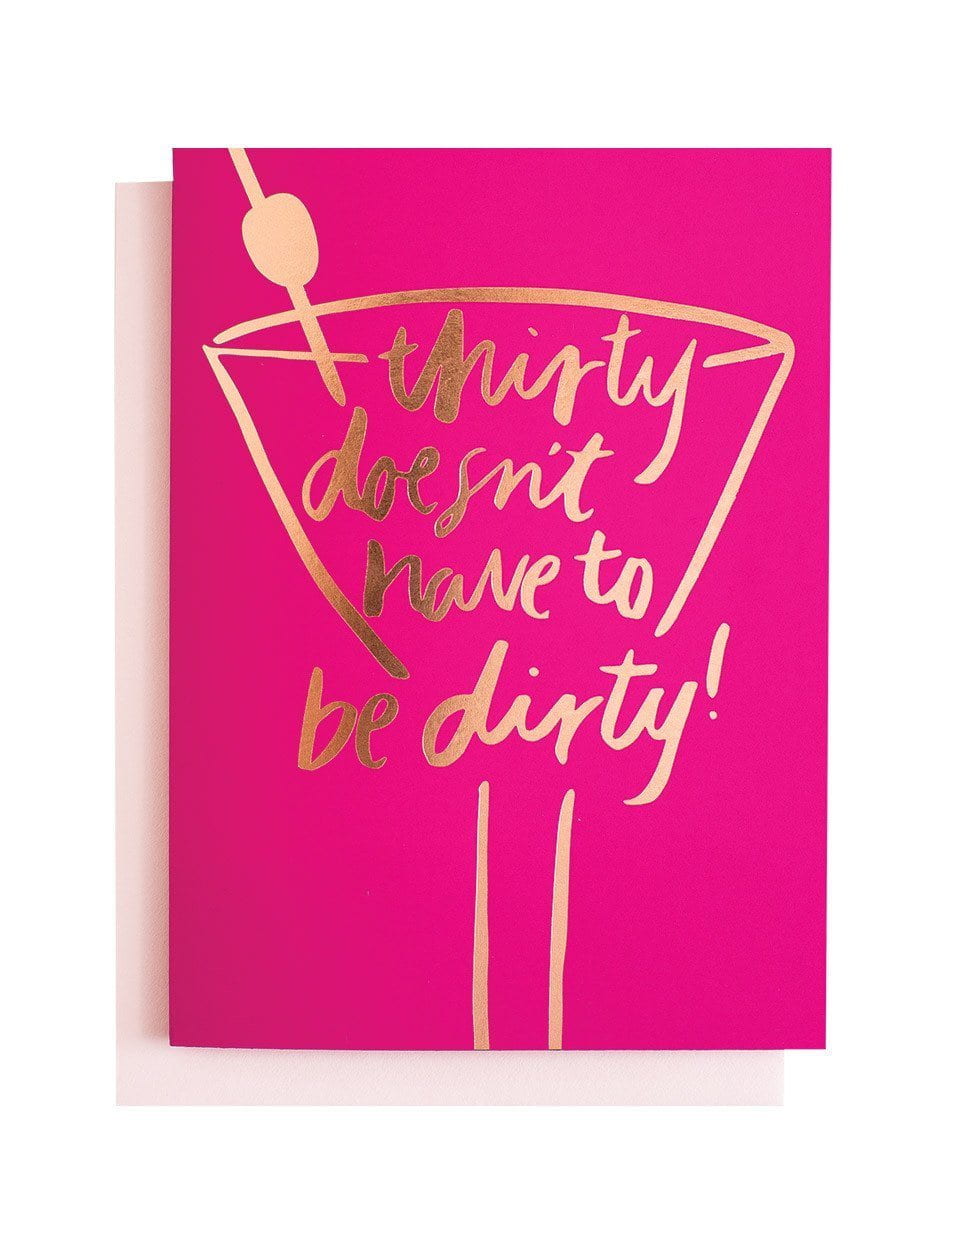 Thirty doesn't have to be dirty Greeting Card | Blushing Confetti